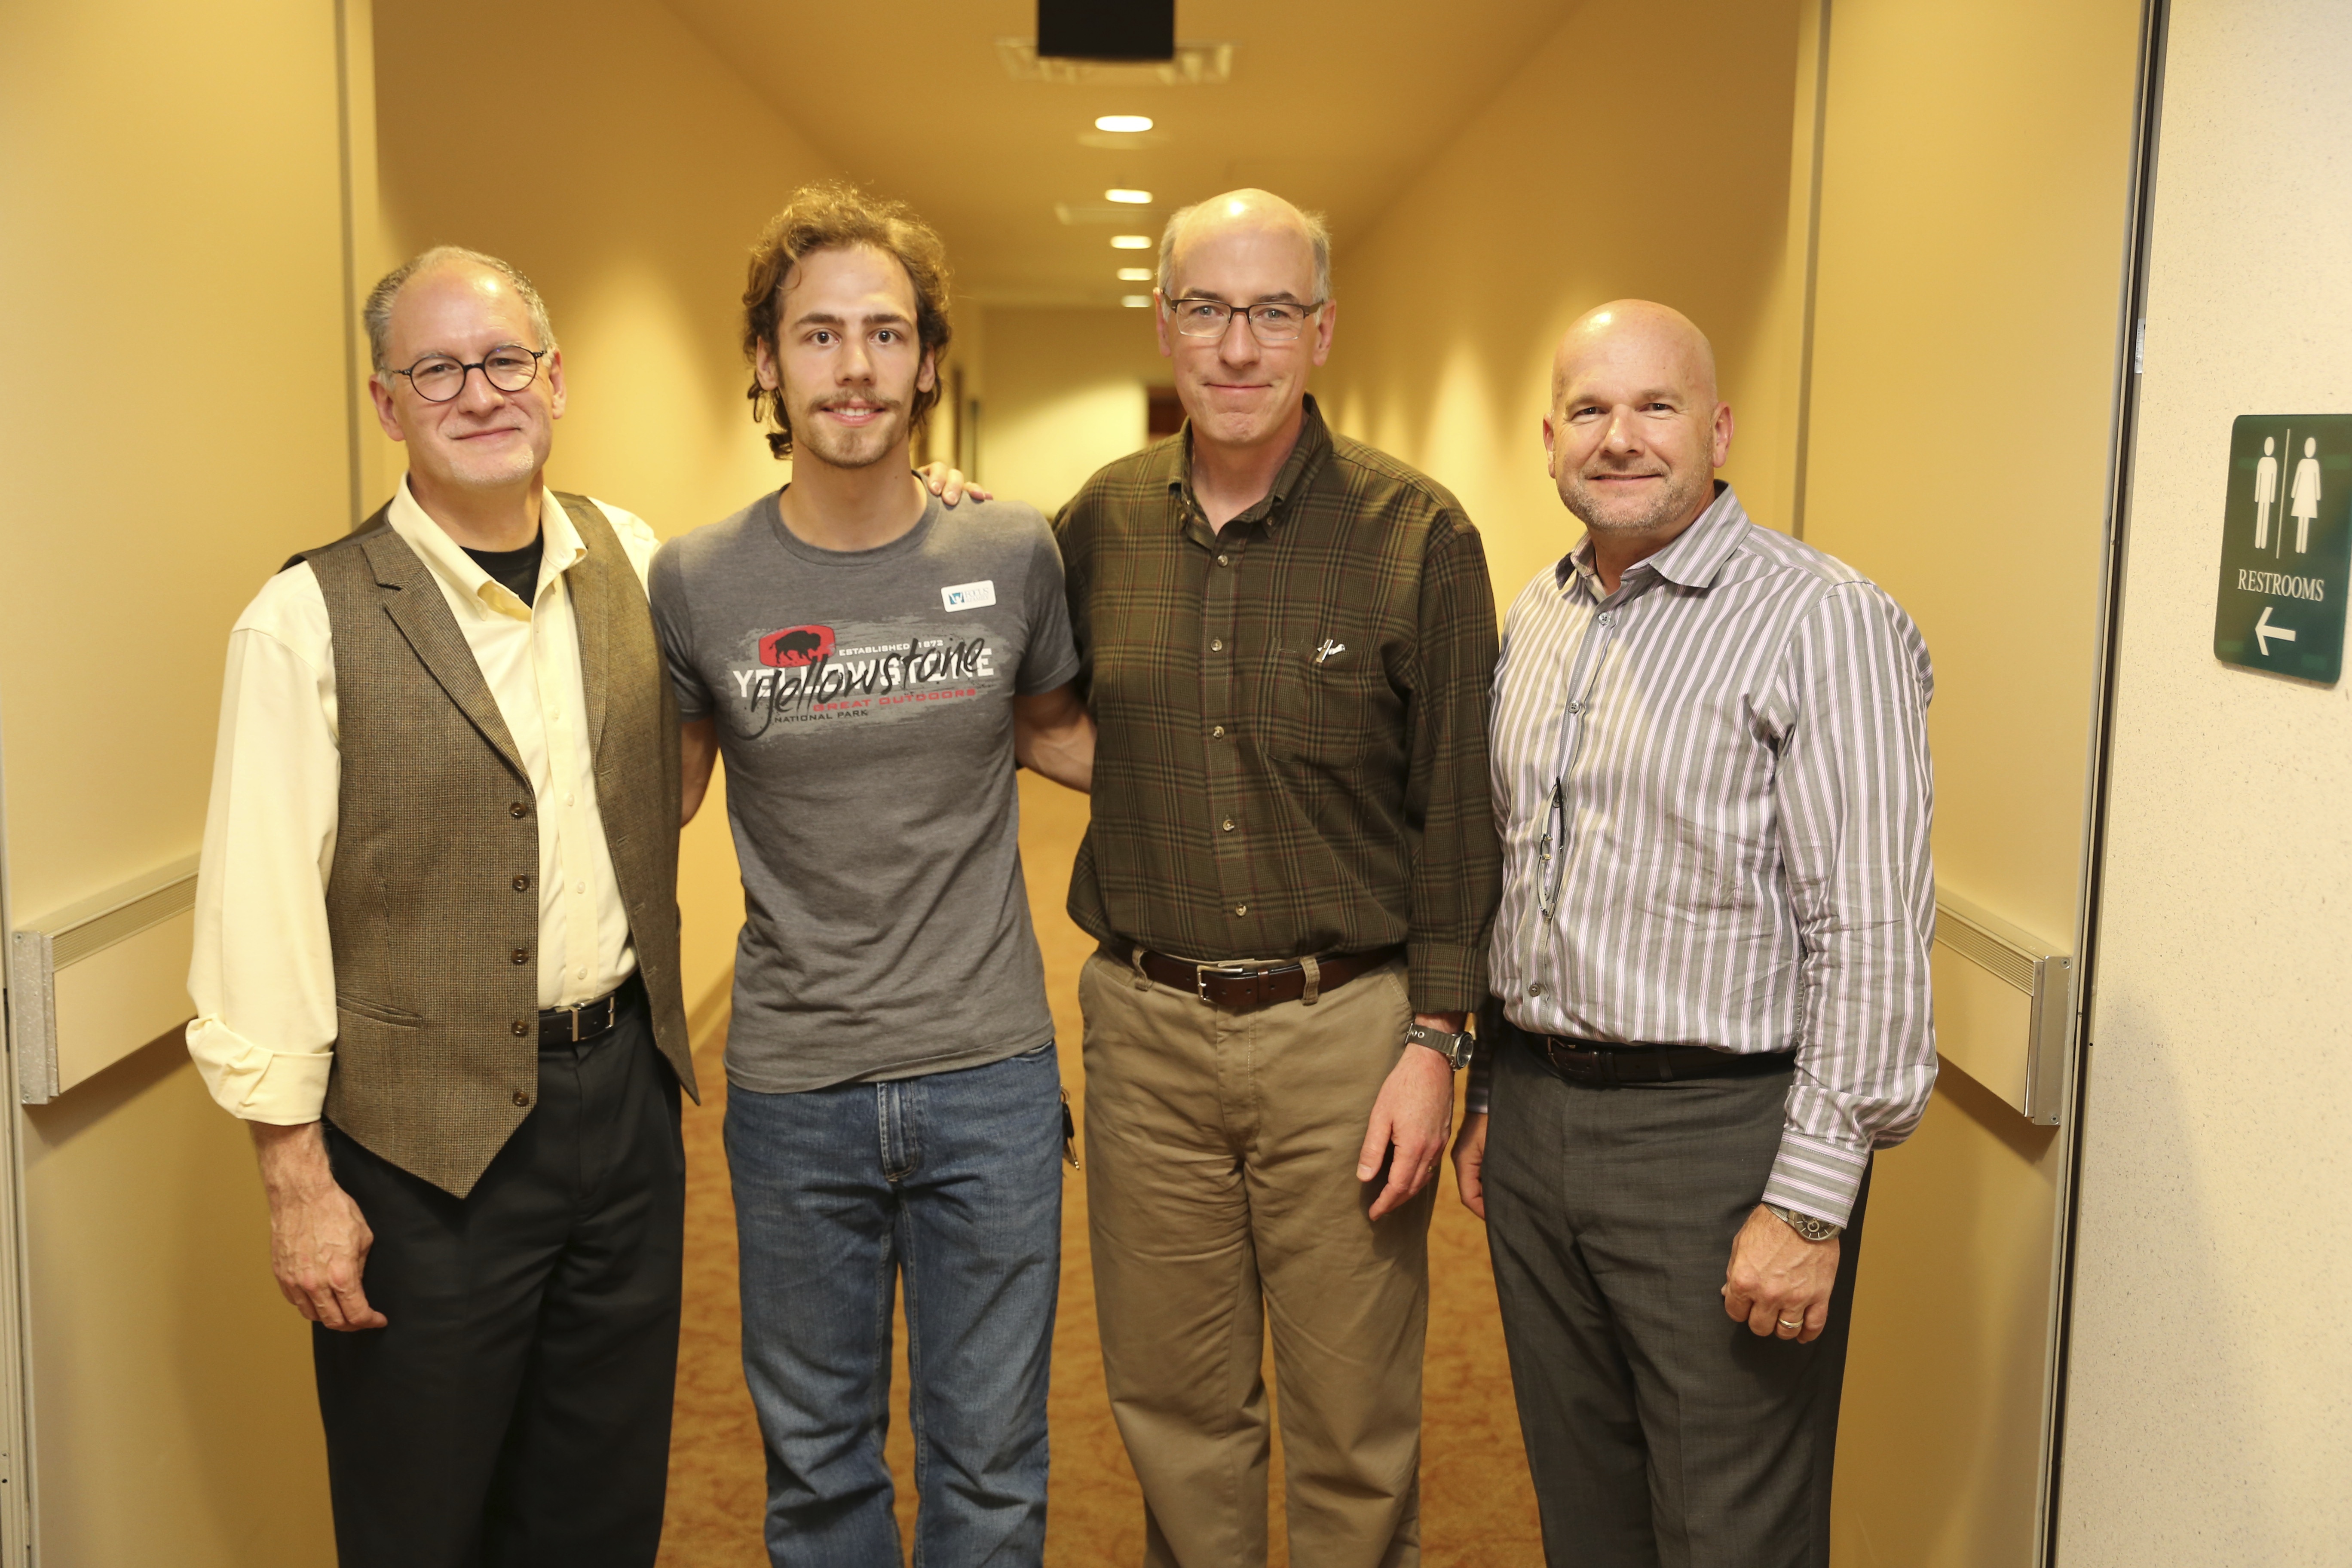 (Left to right) Peabody award-winning writer Paul McCusker, Nathan Jacobson, executive producer of Adventures In Odyssey Dave Arnold, and Focus On The Family Vice President of Content Creation Jim Mhoon at the FOTF headquarters in Colorado Springs.